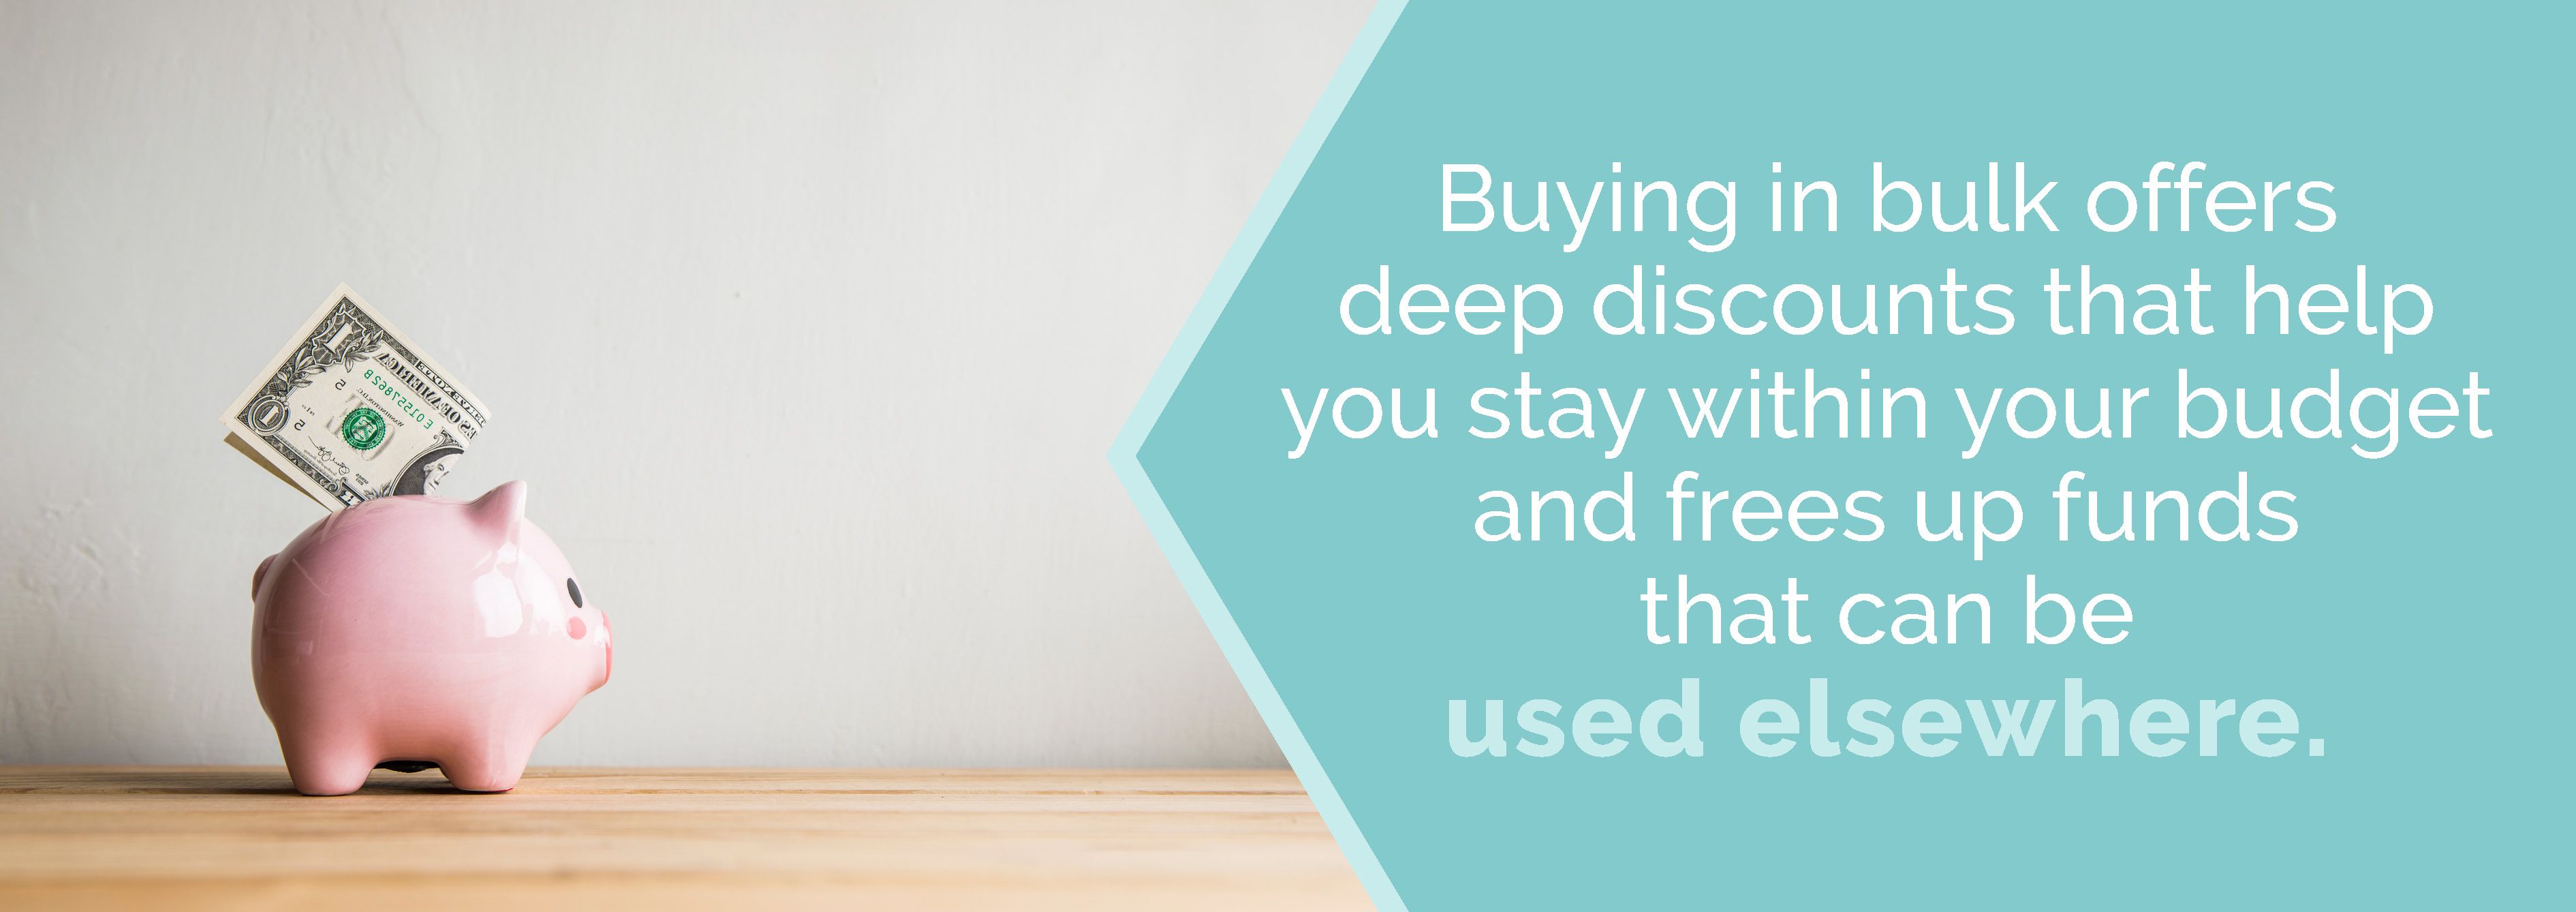 Buying in bulk offers deep discounts to keep you within your budget.